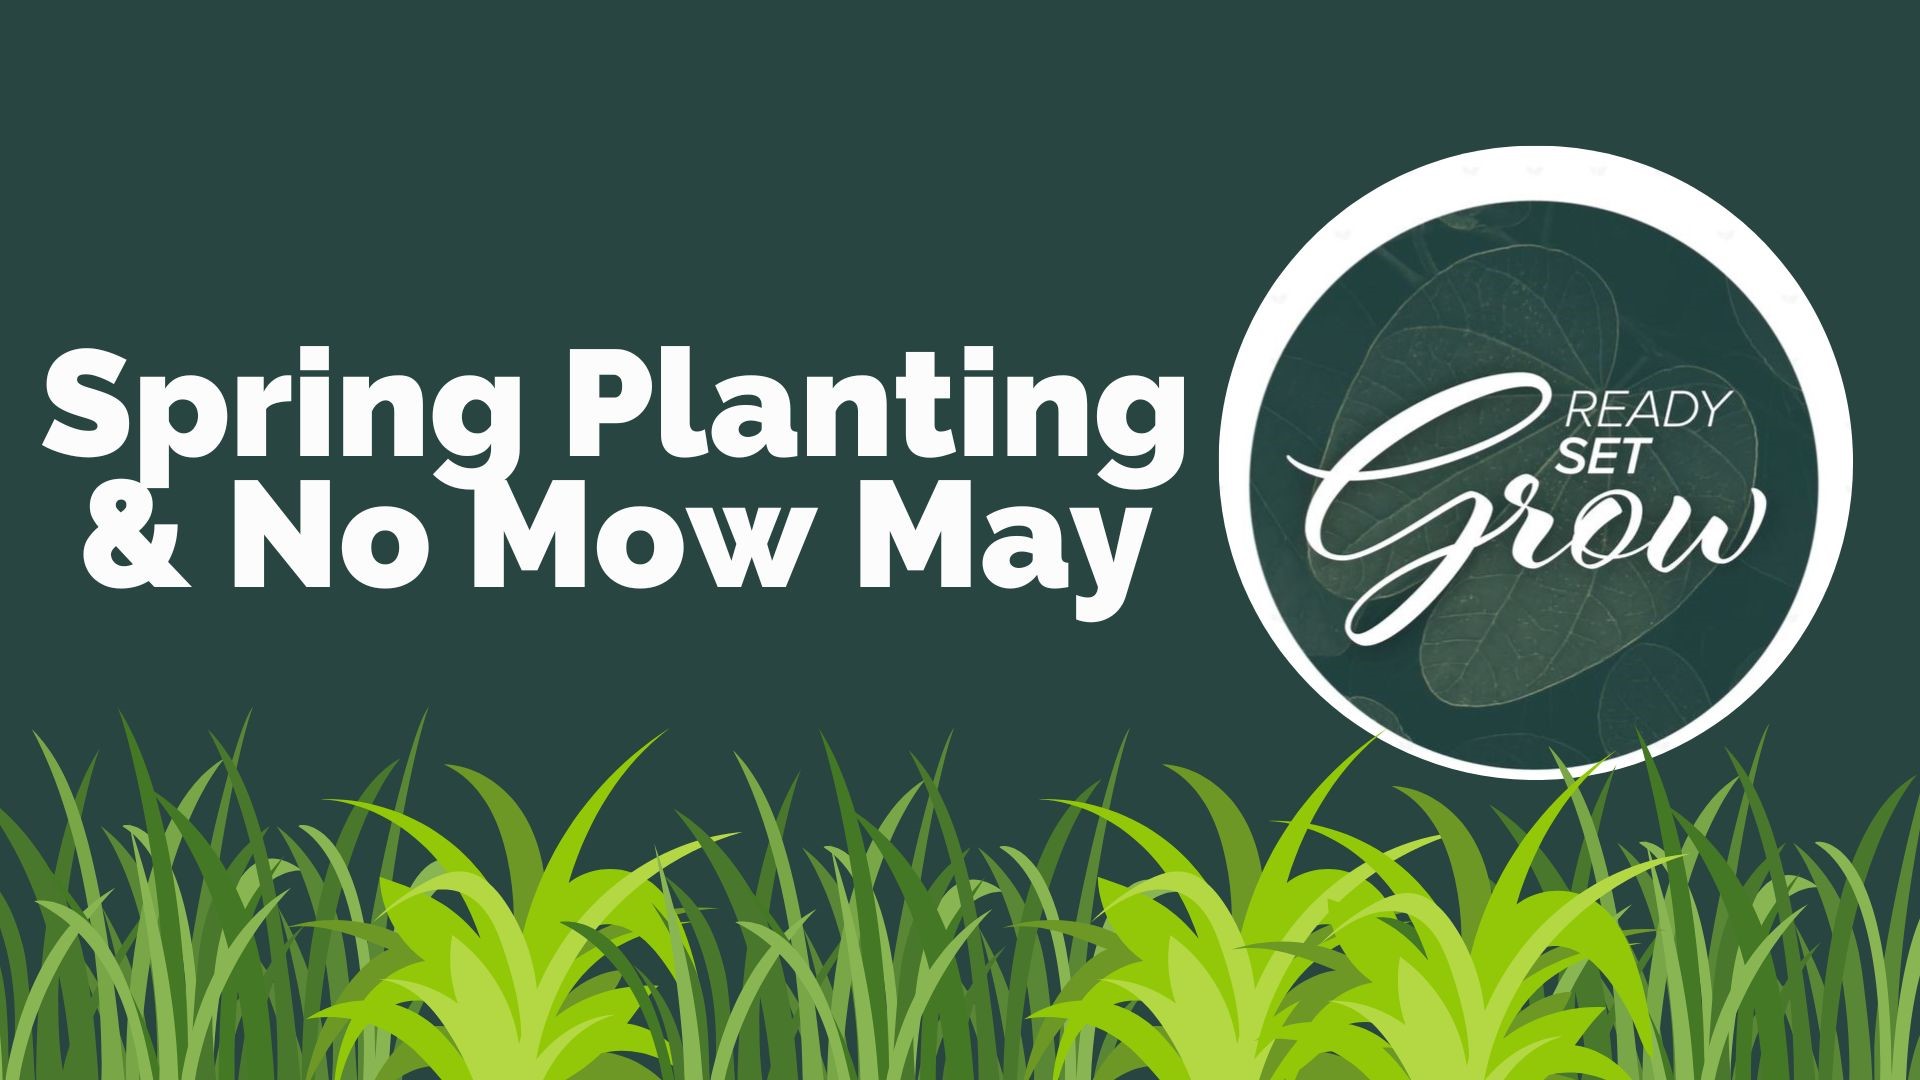 It is May which means time for spring planting. The flowers to avoid and which ones to consider growing this year, plus a look at the 'no mow May' trend.